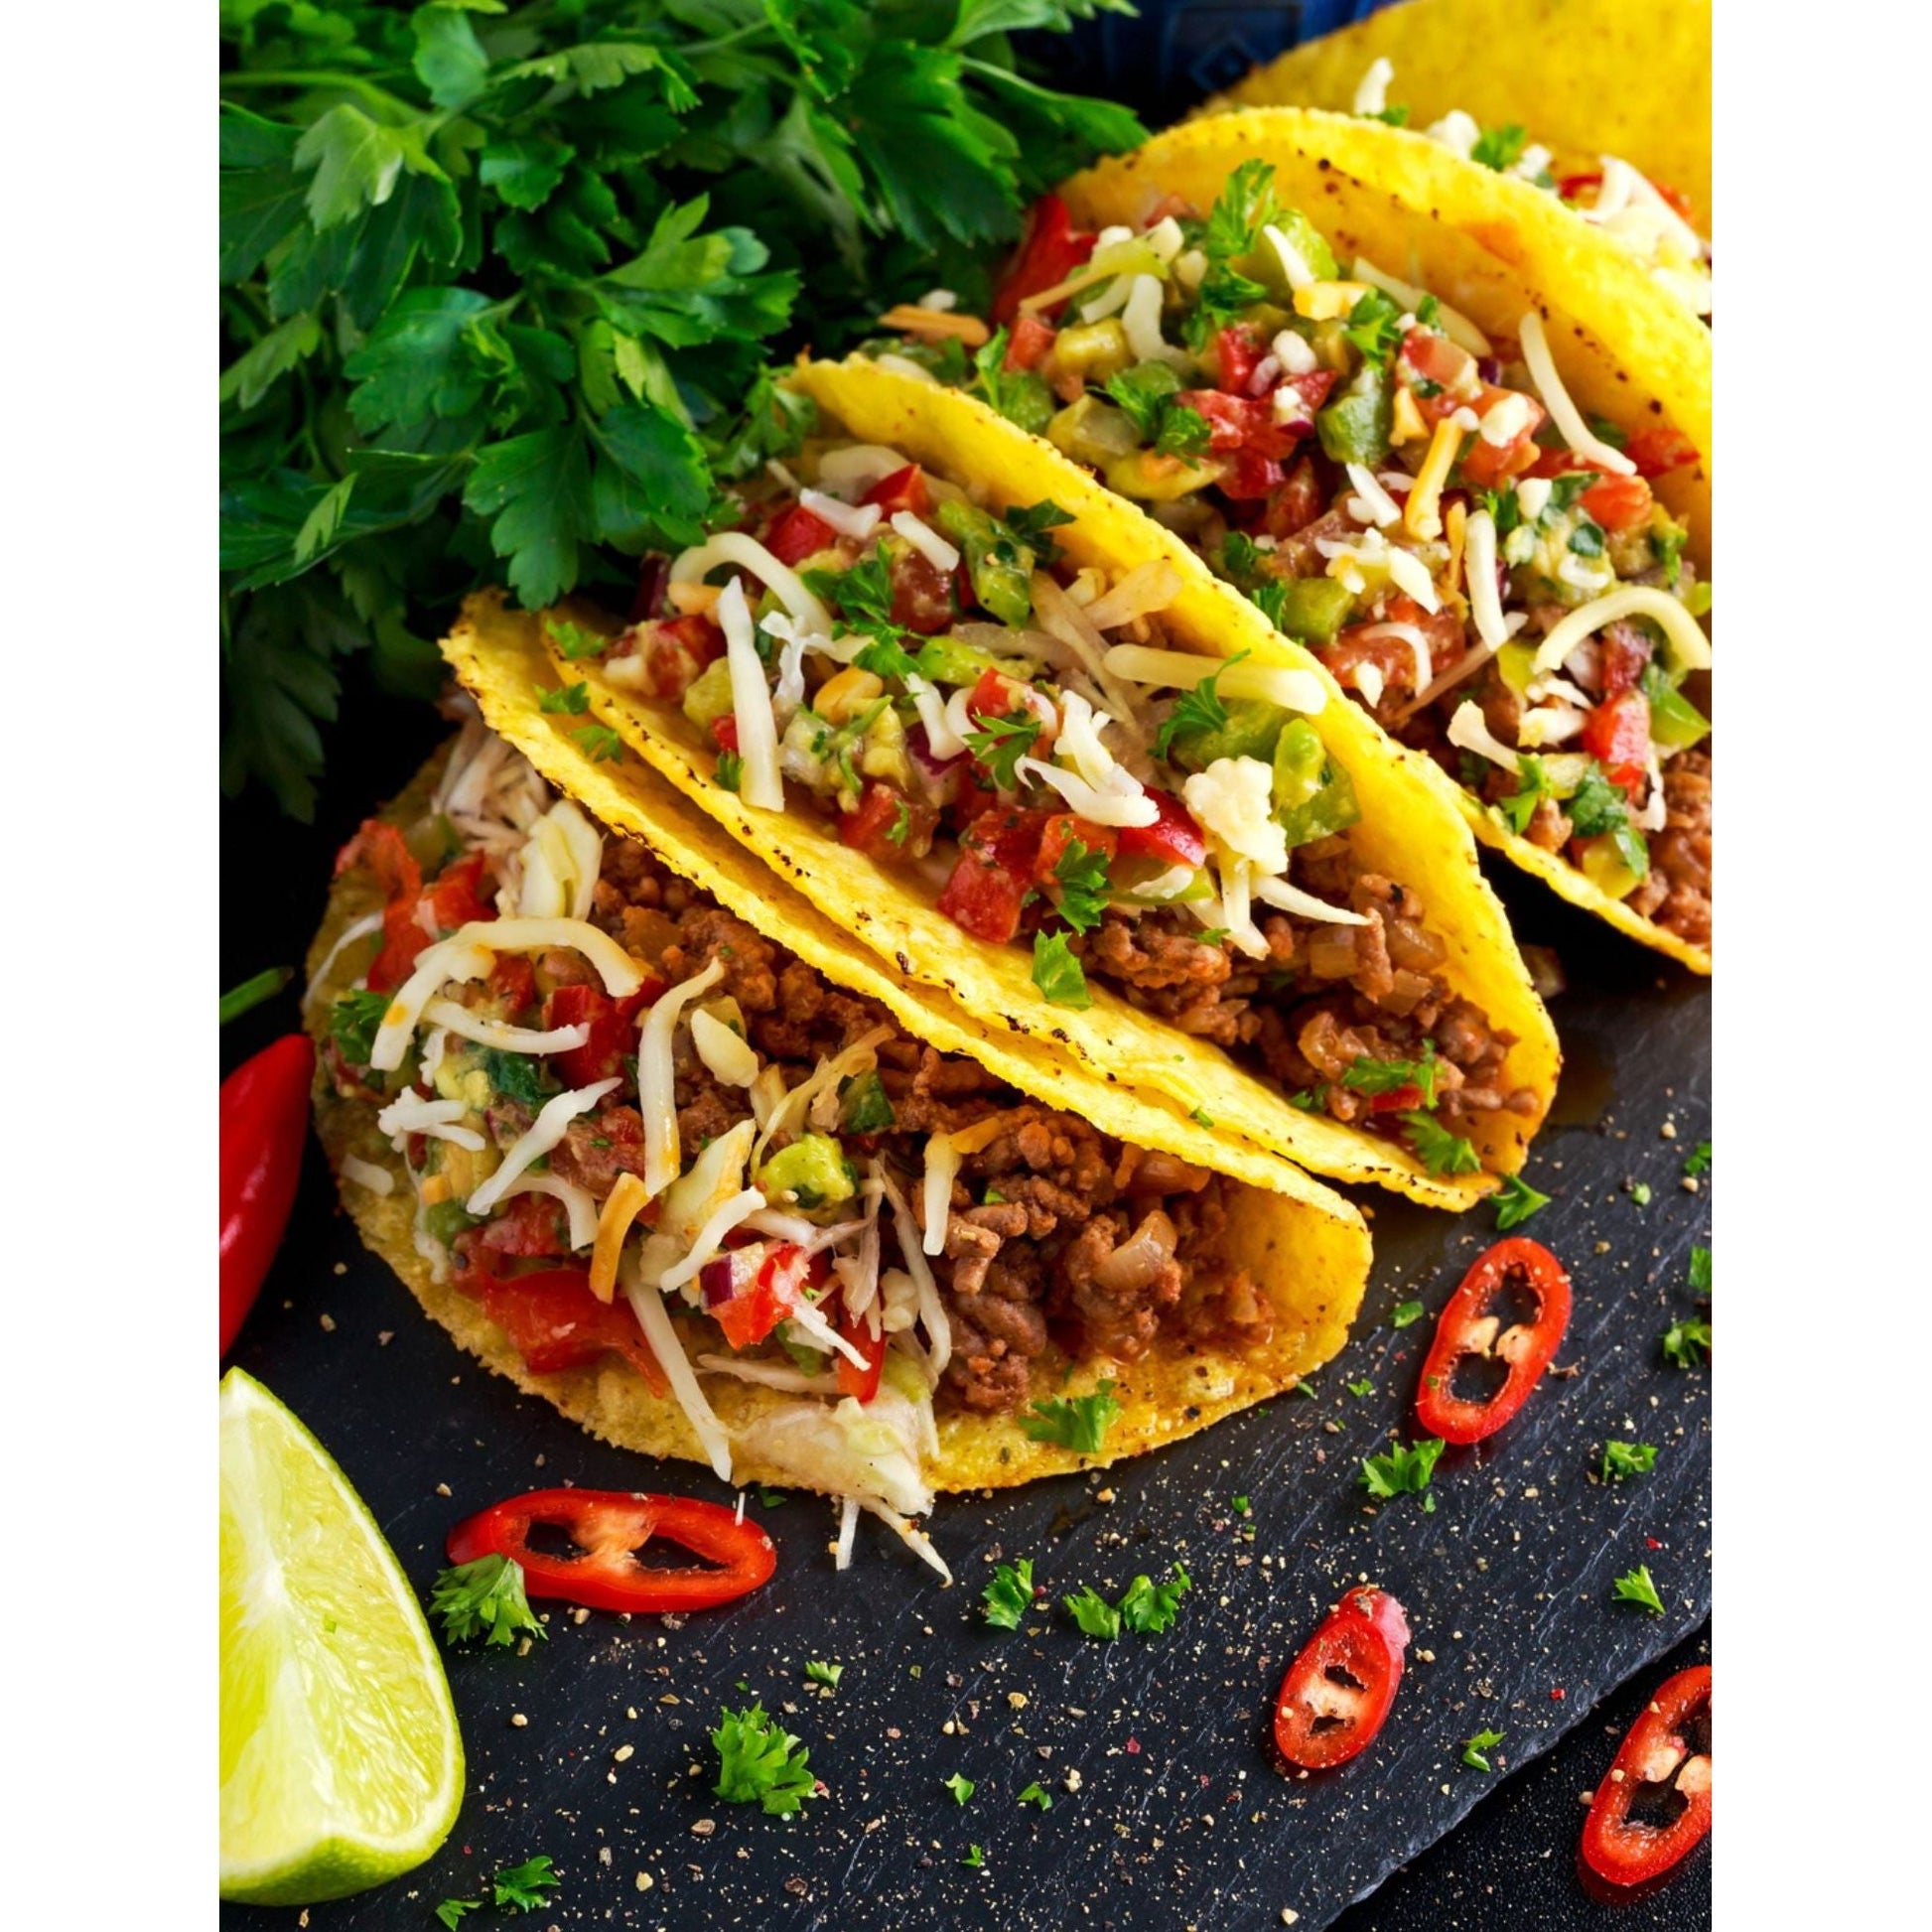 Three delicious tacos filled with meat and vegetables, beautifully presented on a black slate.